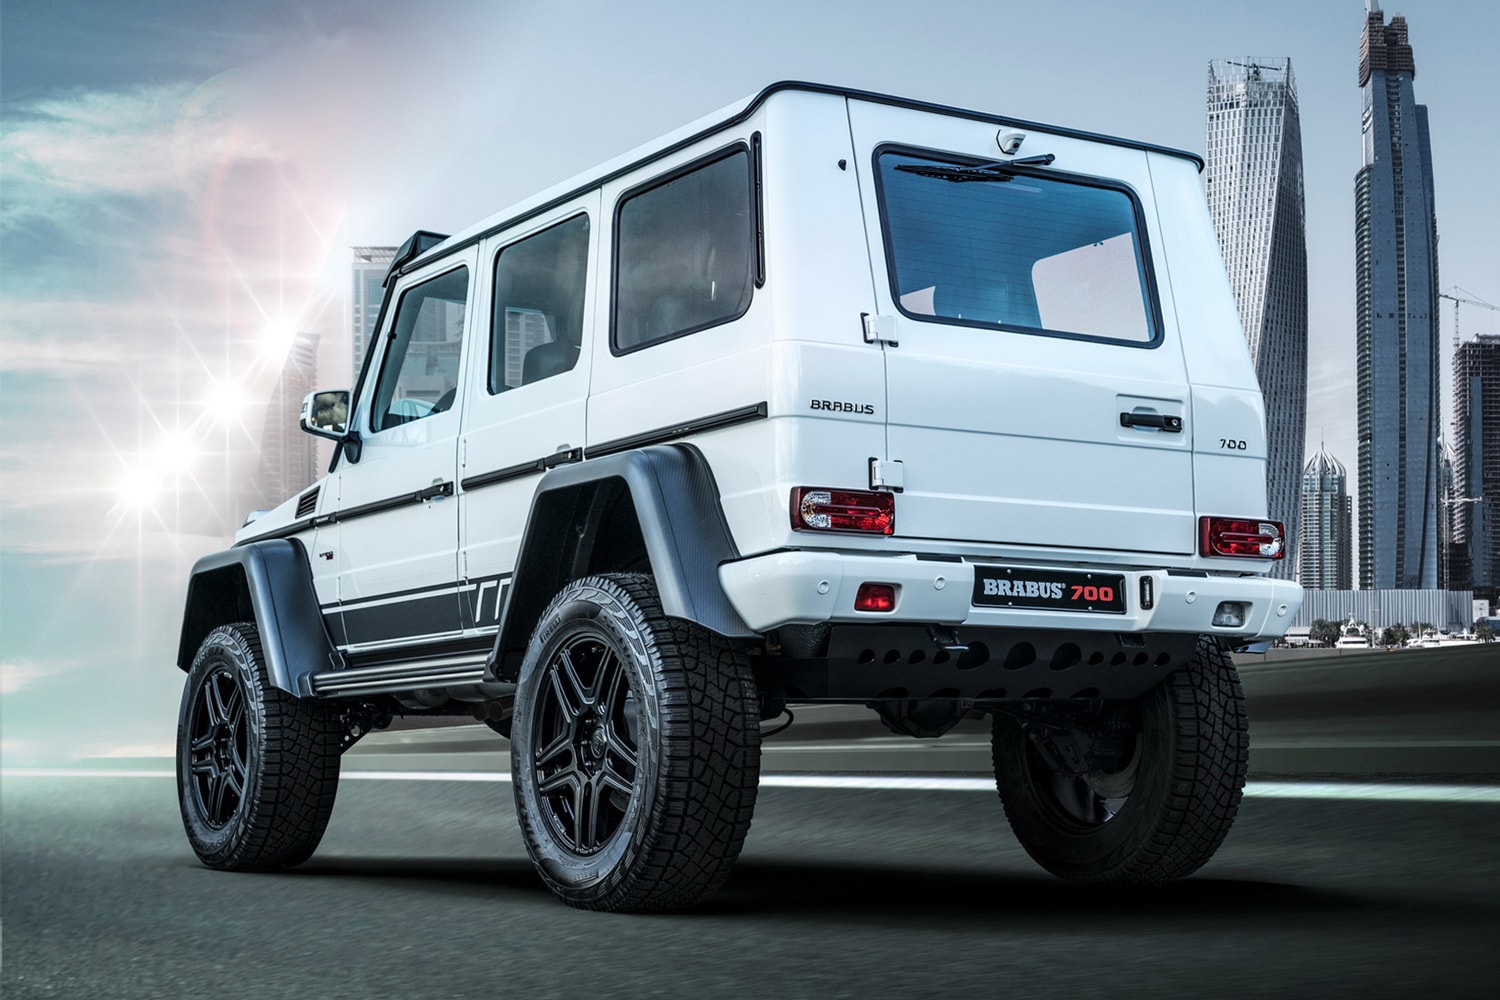 Brabus 700 4x4² Final Edition Info supercar Tuning racing speed off-road luxury horsepower engineering performance 